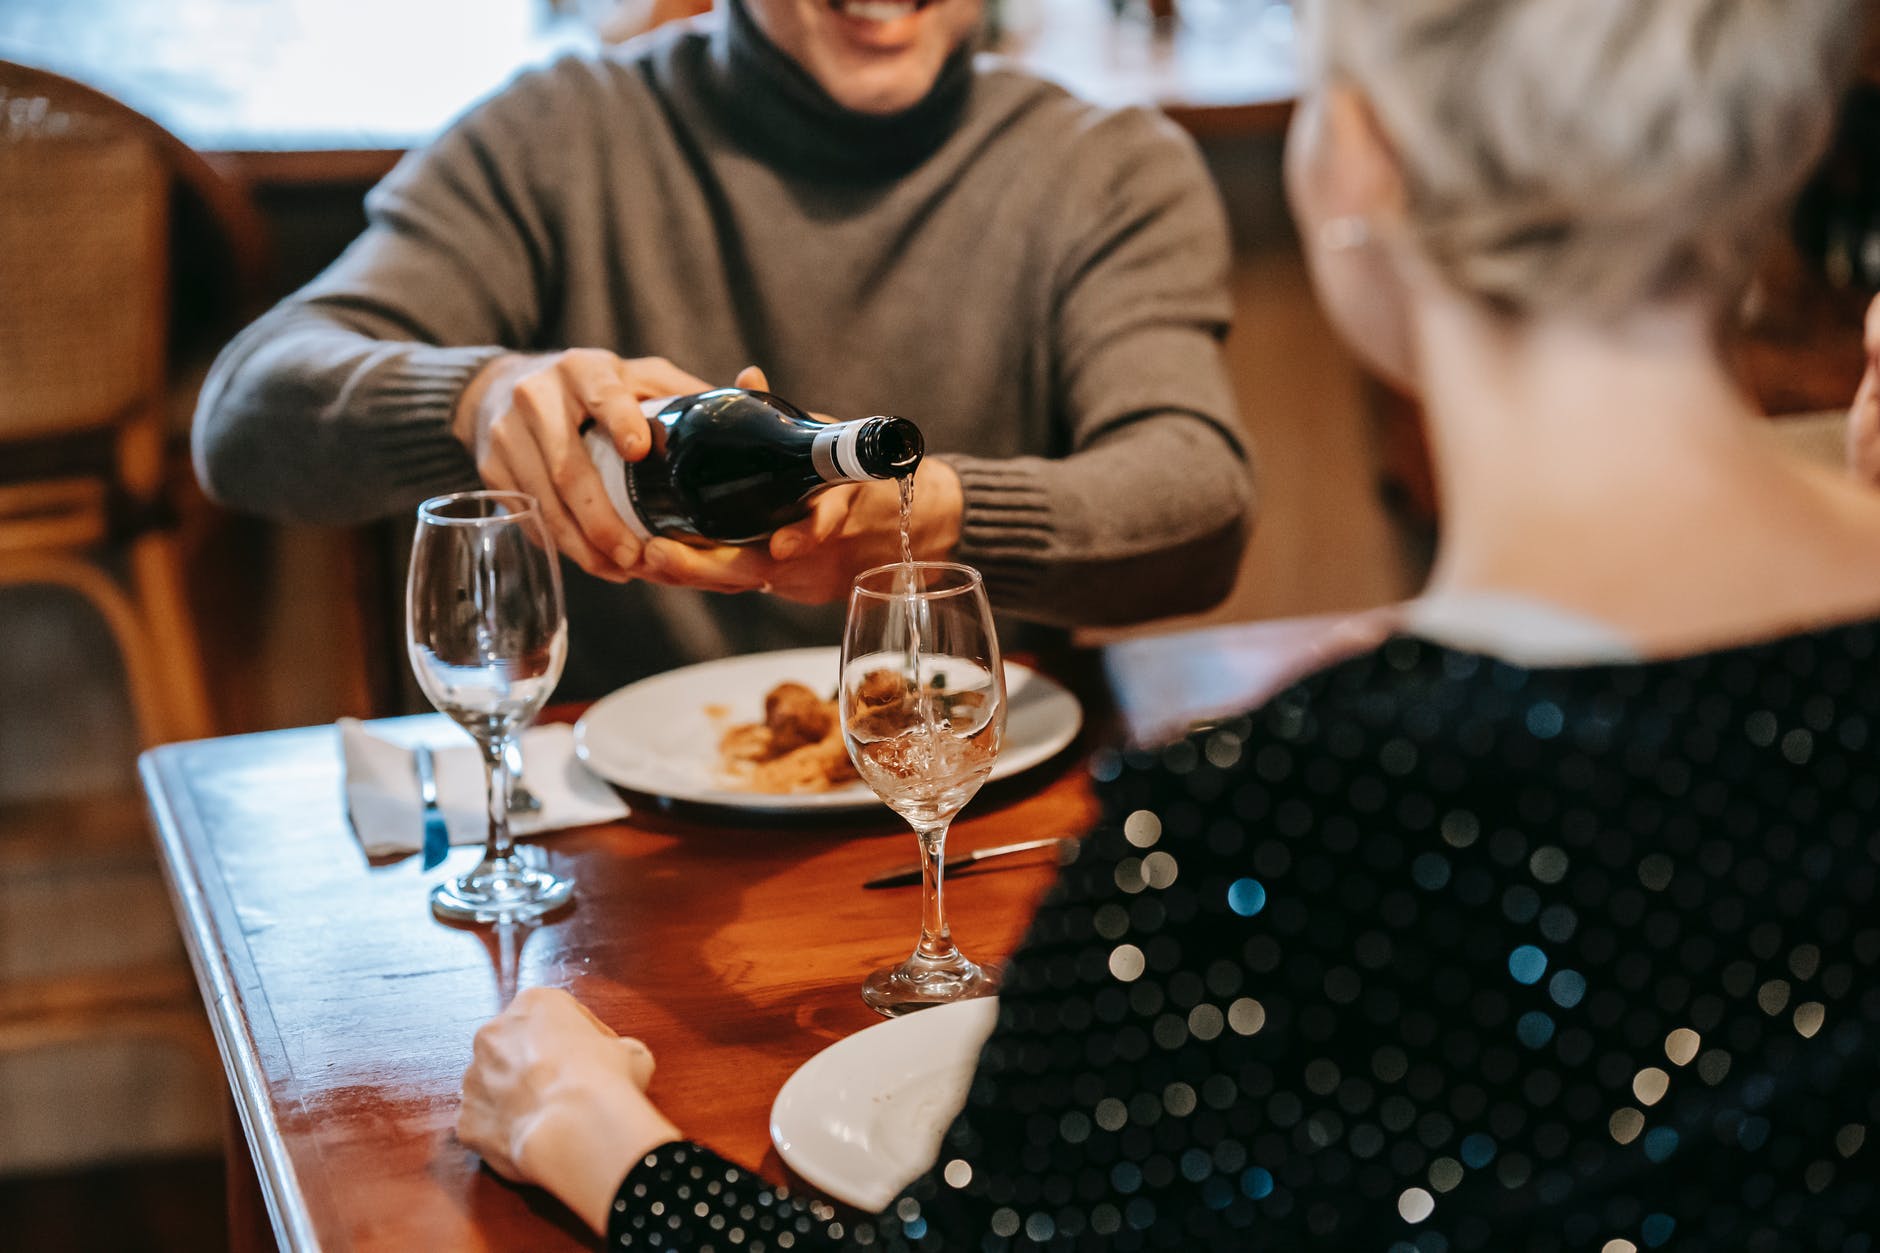 anonymous couple having date with wine and food in restaurant